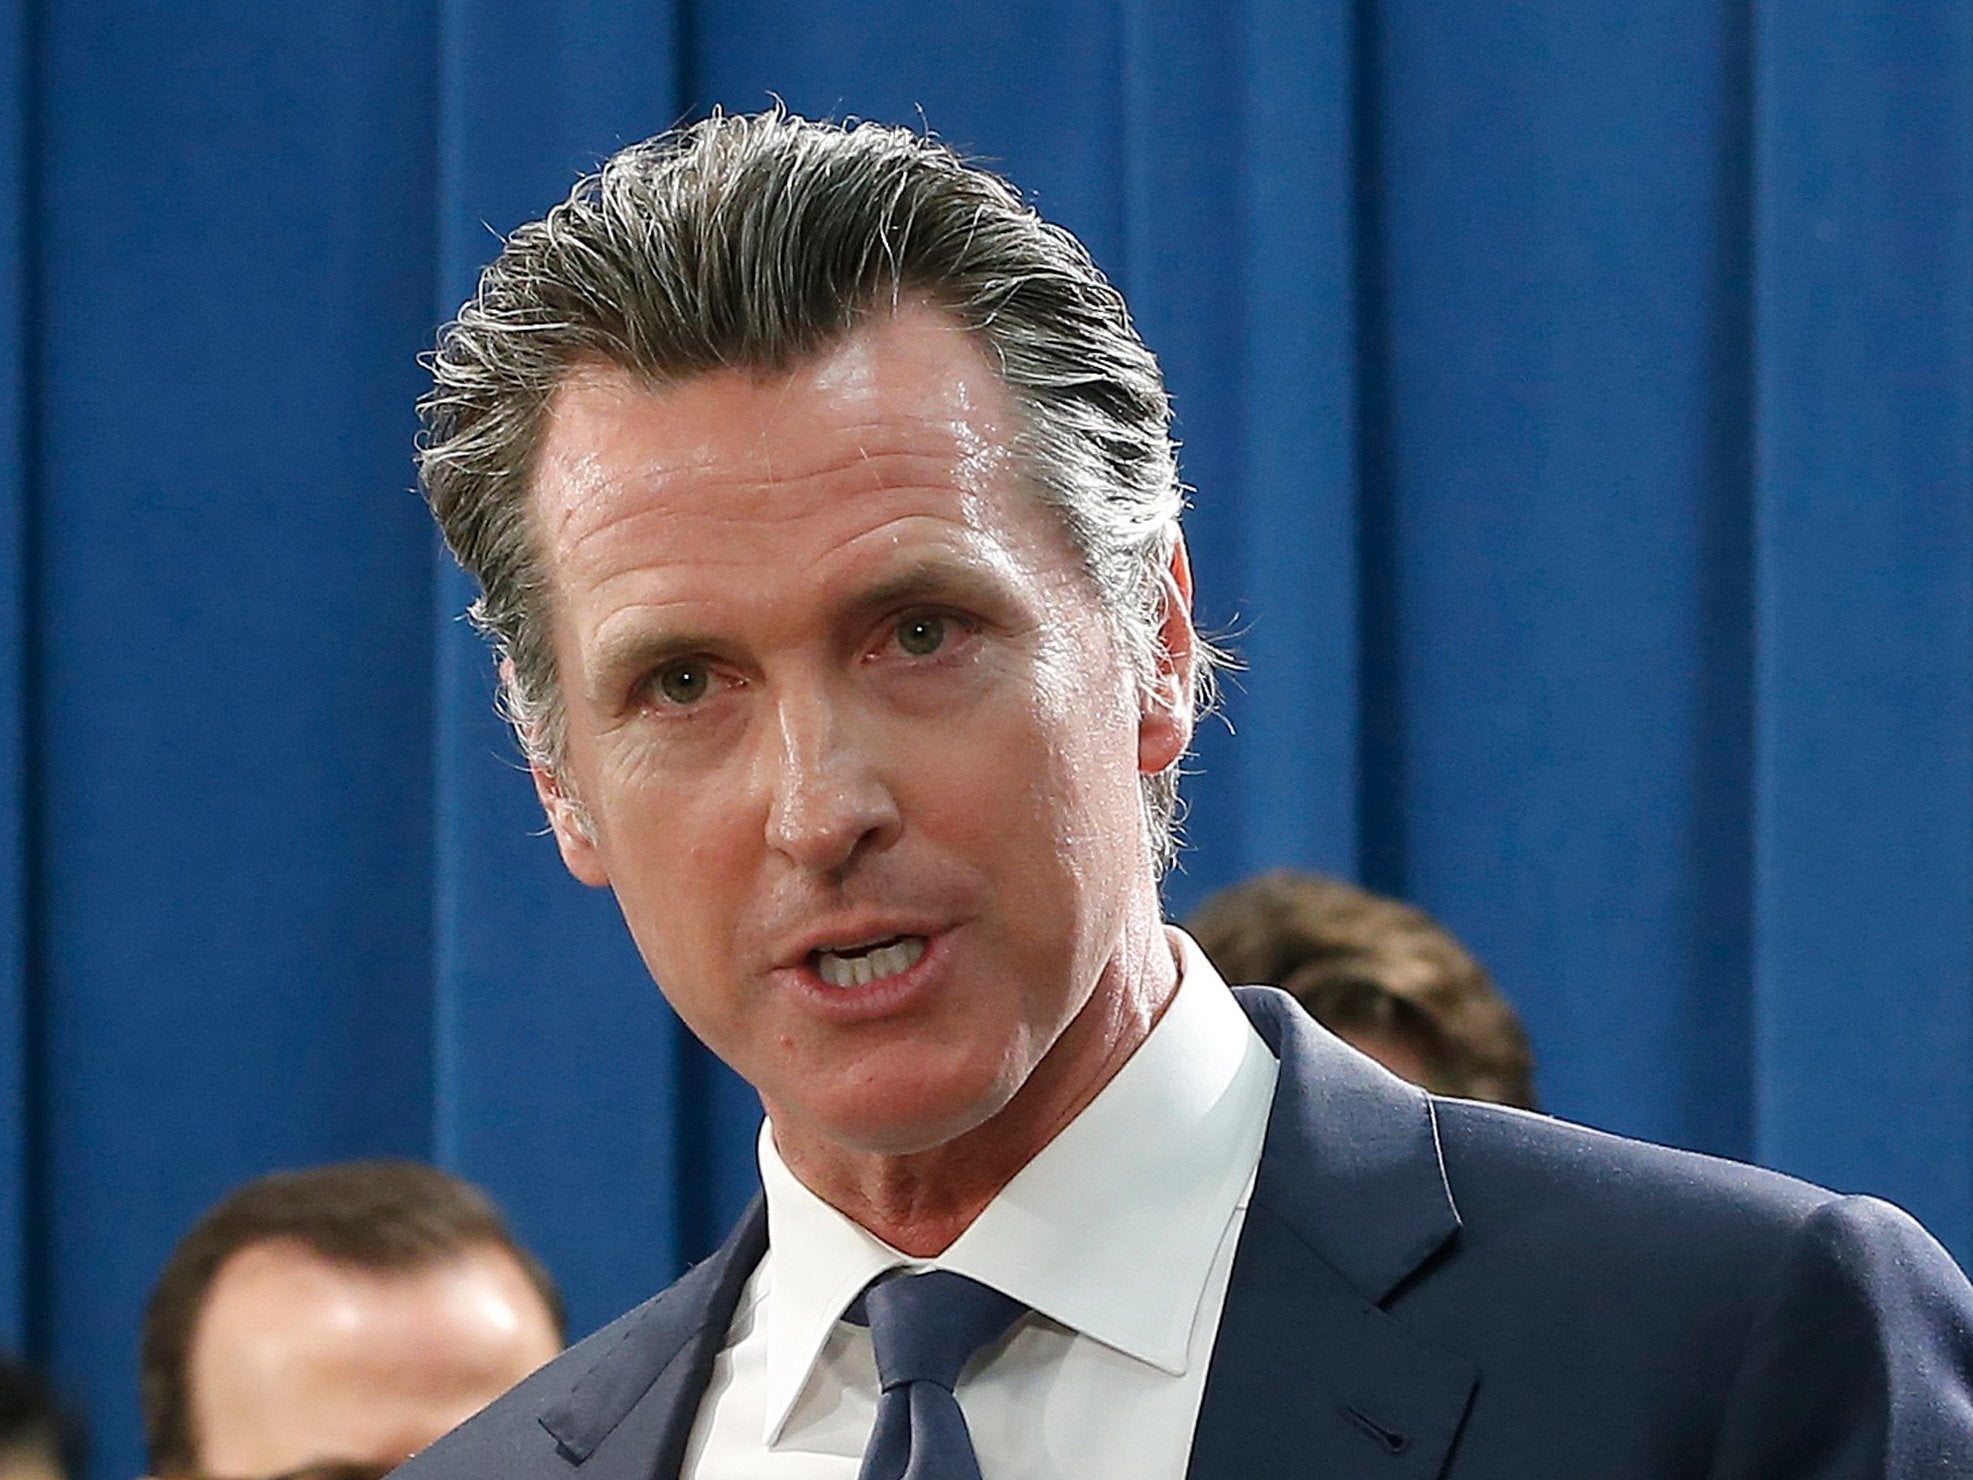 Governor Gavin Newsom has described the decision as 'a direct assault on California' and vowed to sue the Trump administration